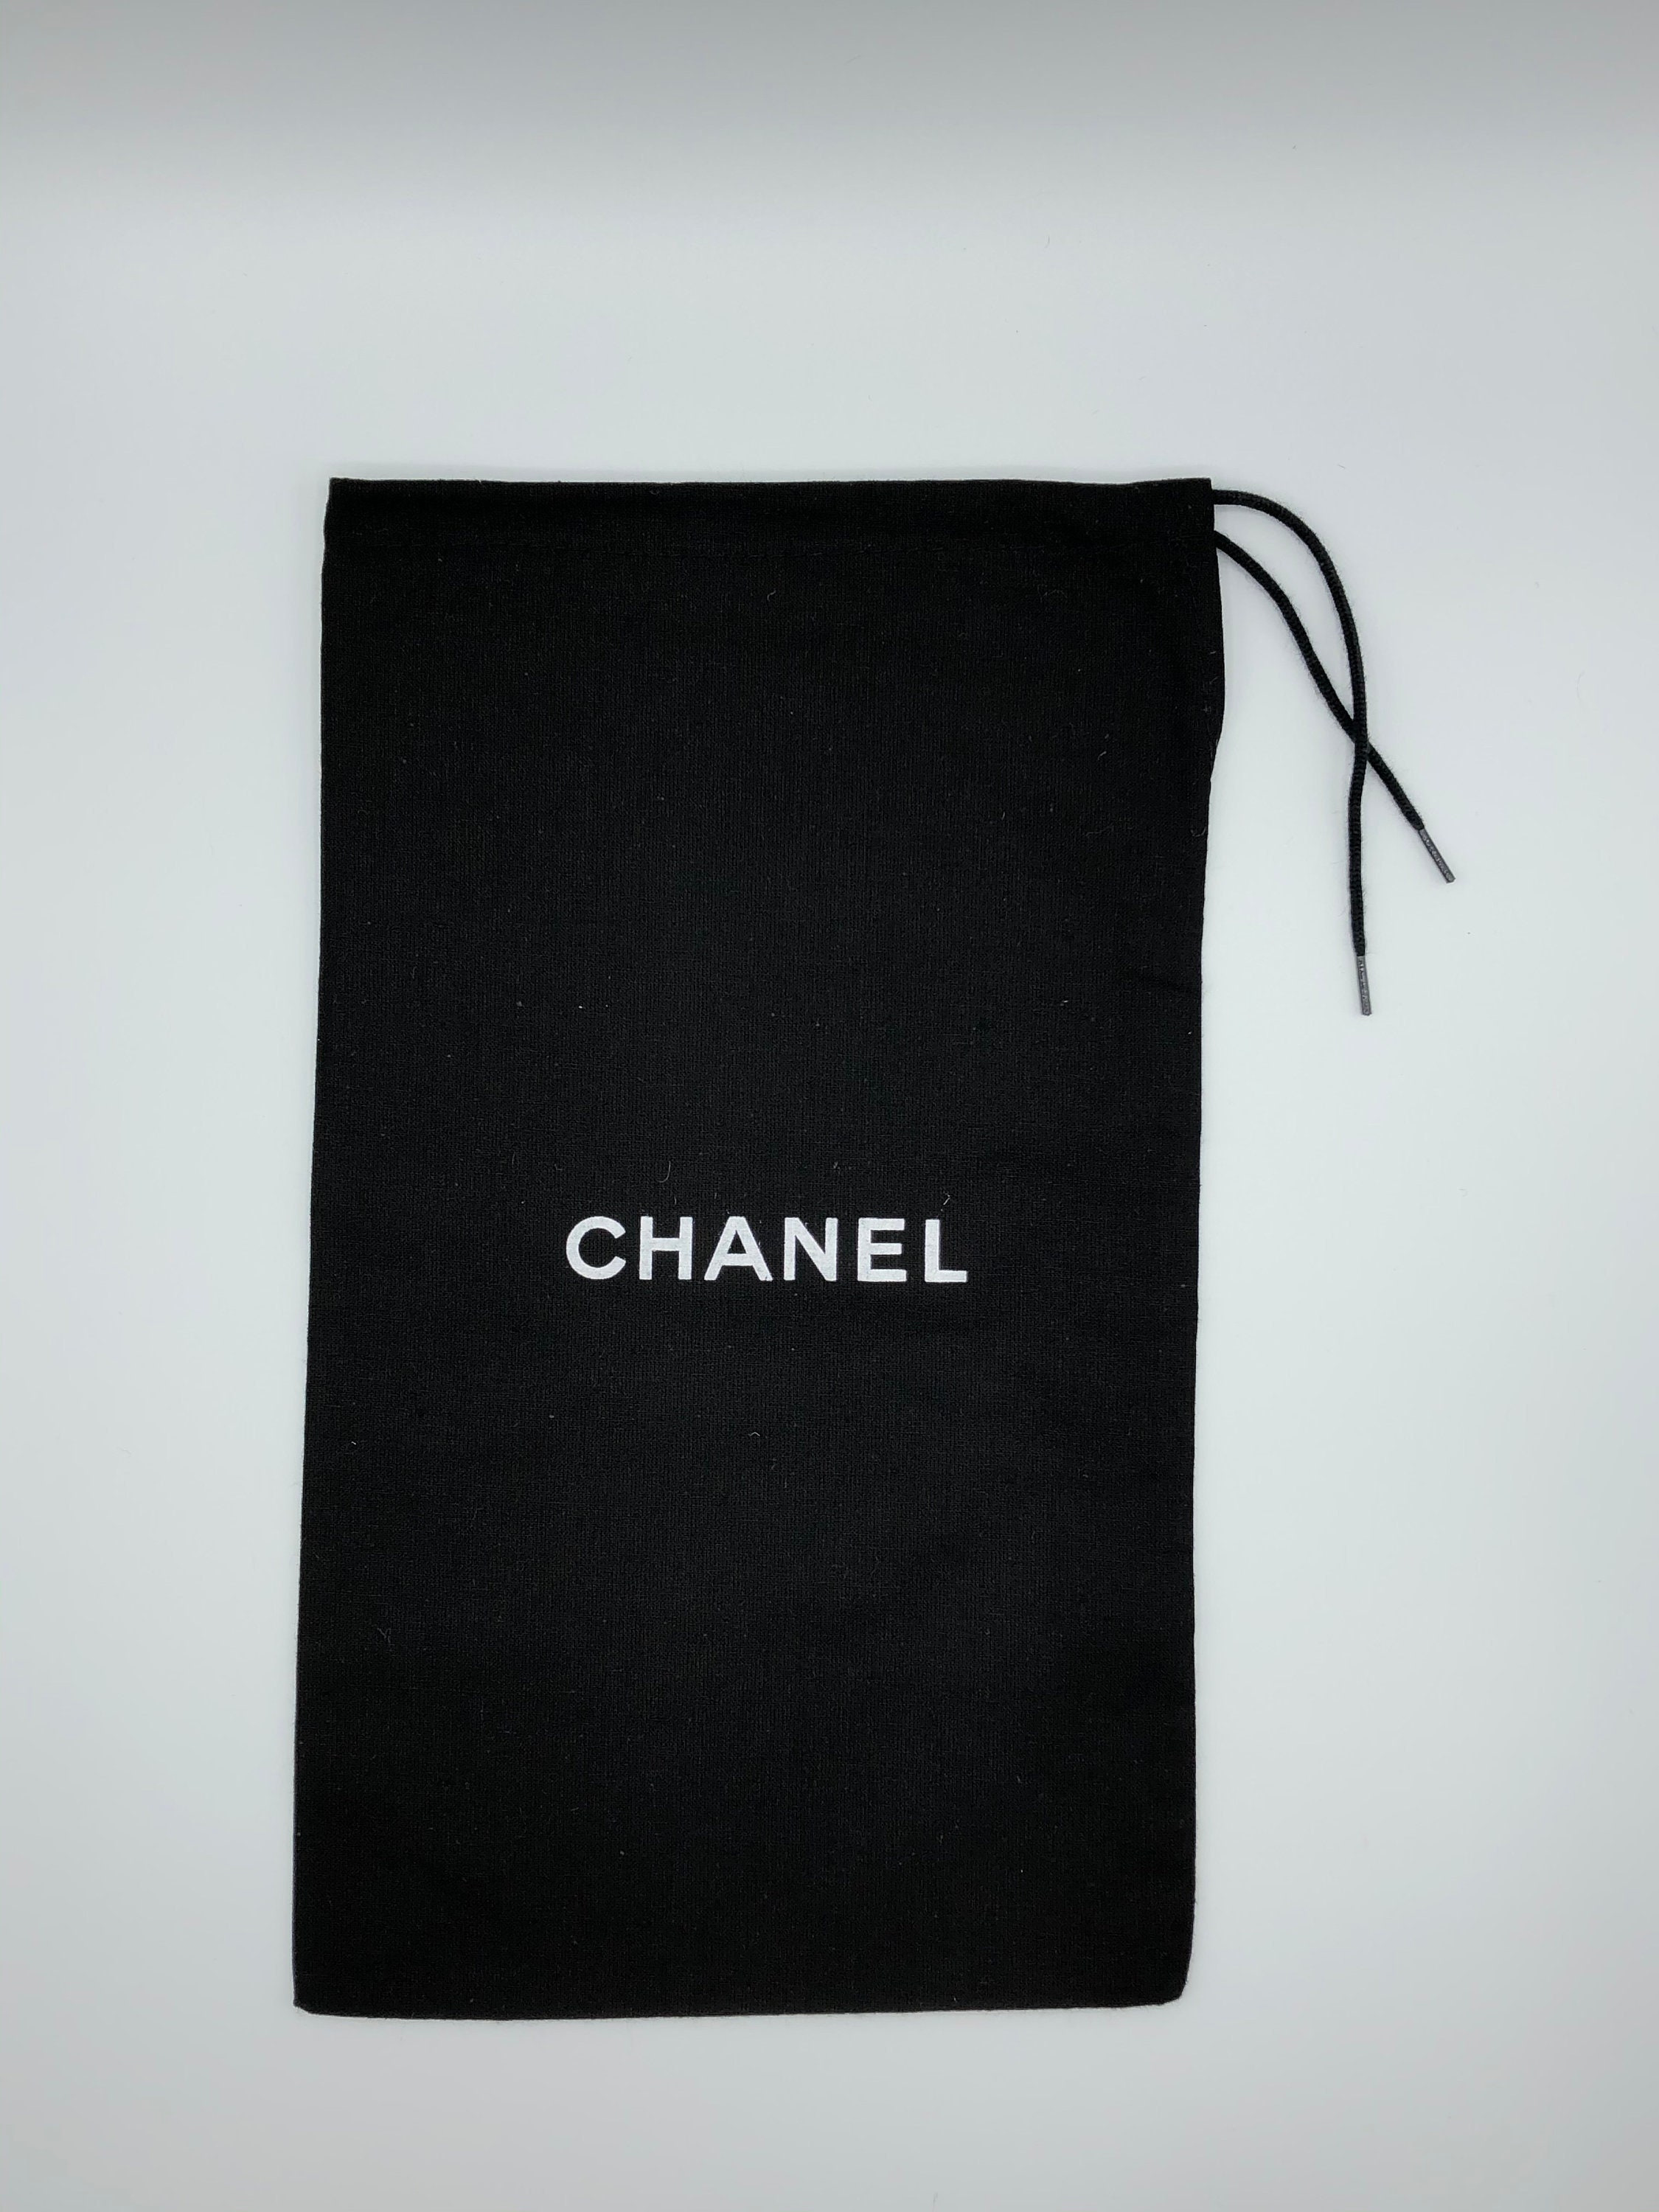 Authentic Chanel Box Dust Bag  Paper bag for Sale Luxury Bags  Wallets  on Carousell